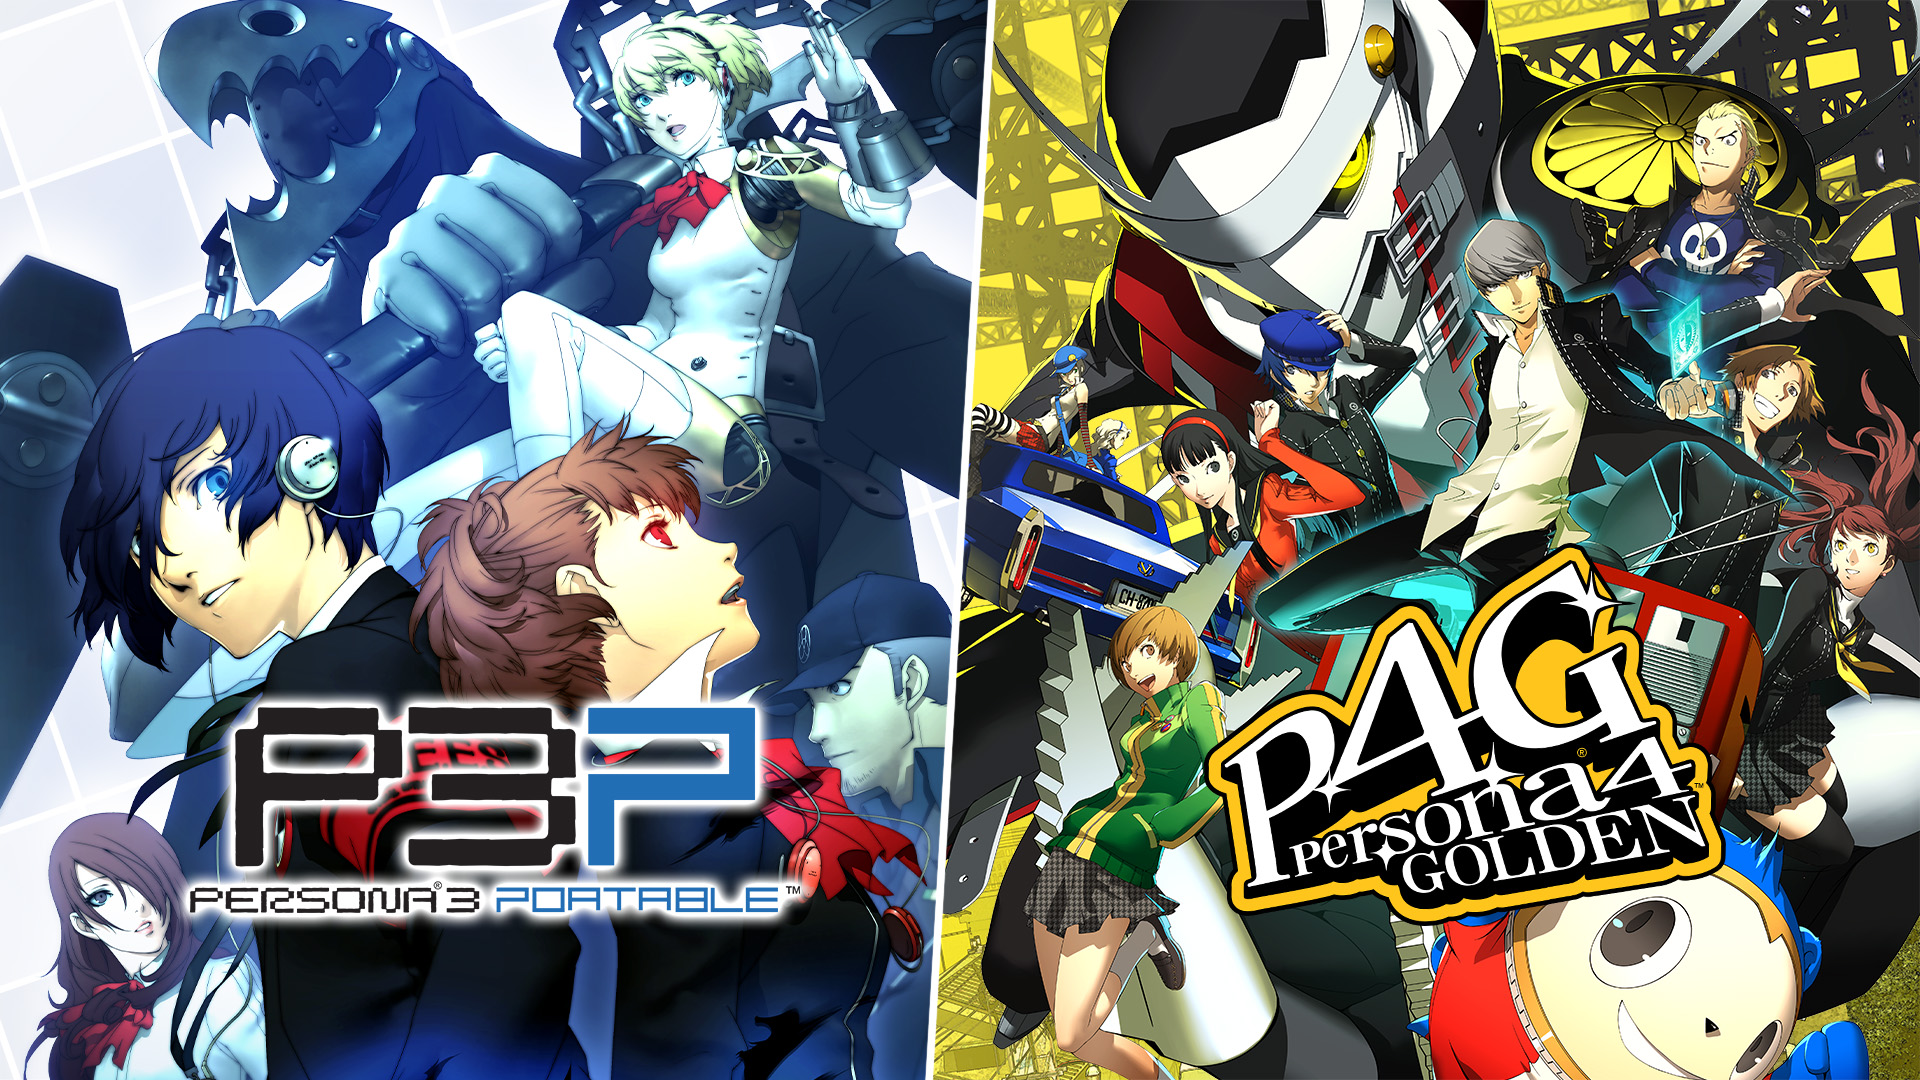 Persona 5 Royal, Persona 4 Golden, Persona 3 Portable releasing on Xbox,  PS4, PS5 and Steam - but not Switch